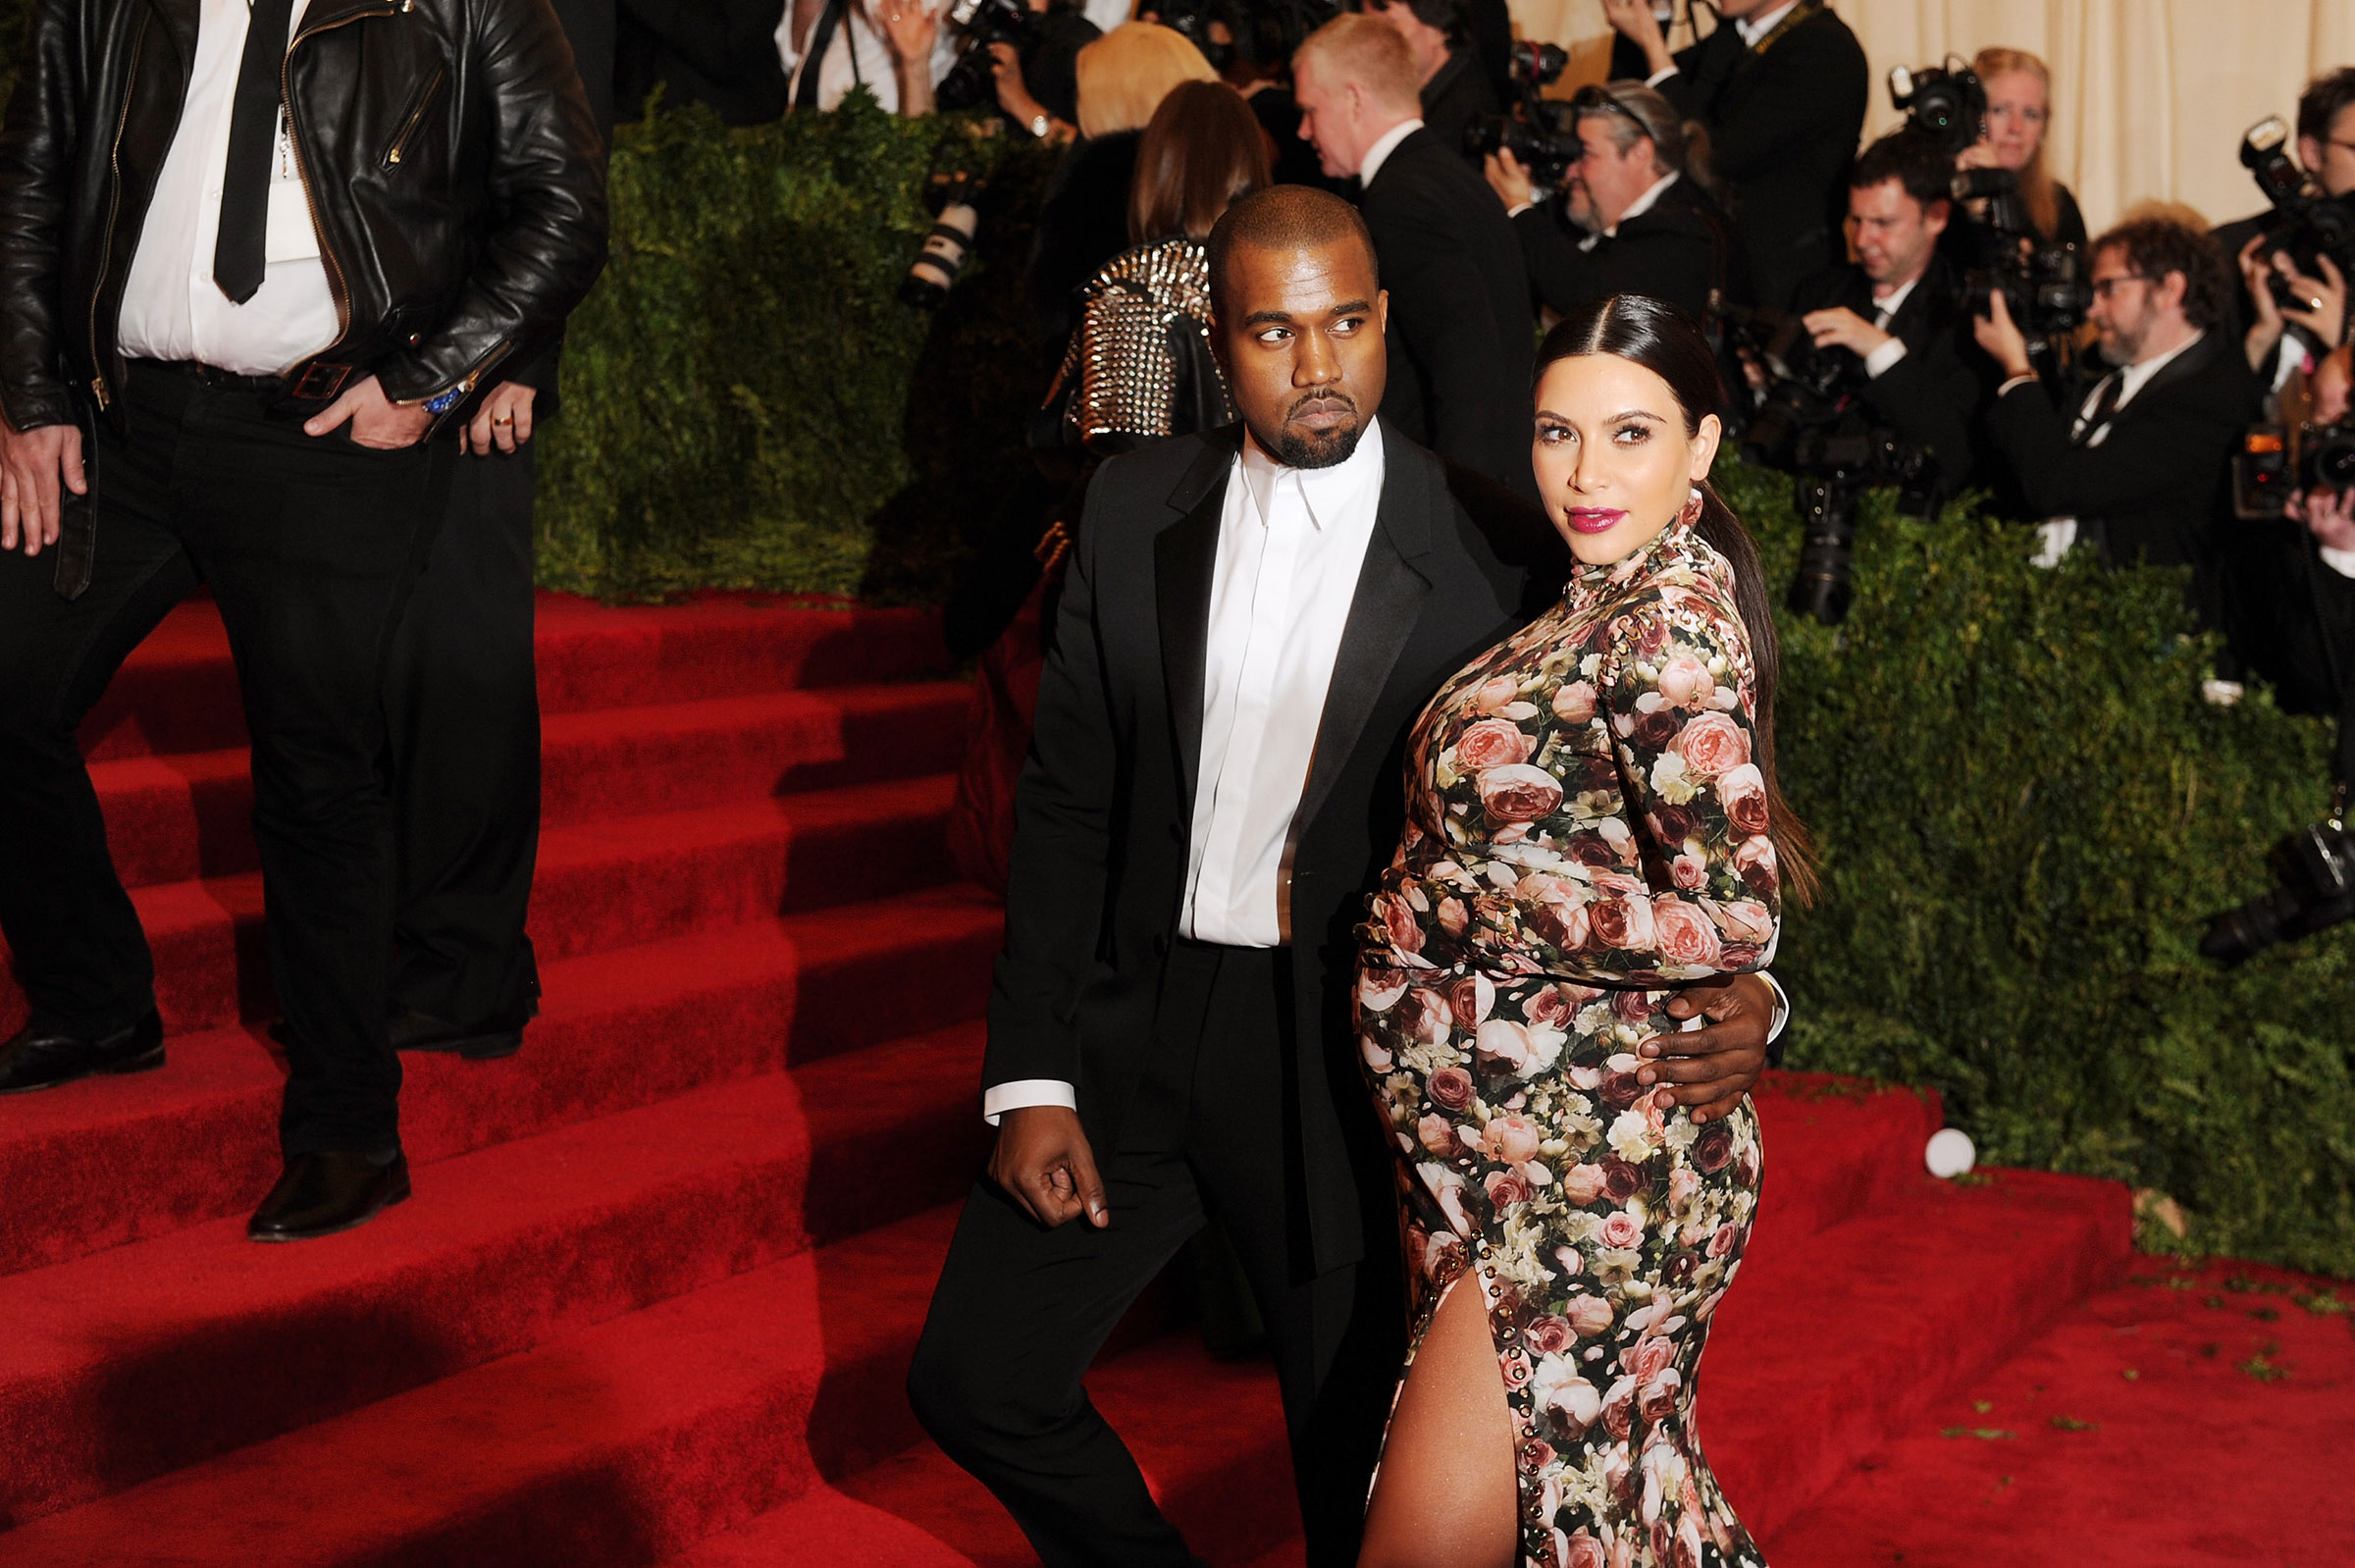 Kanye West and Kim Kardashian attend the 2013 Met Gala celebrating "PUNK: Chaos to Couture."